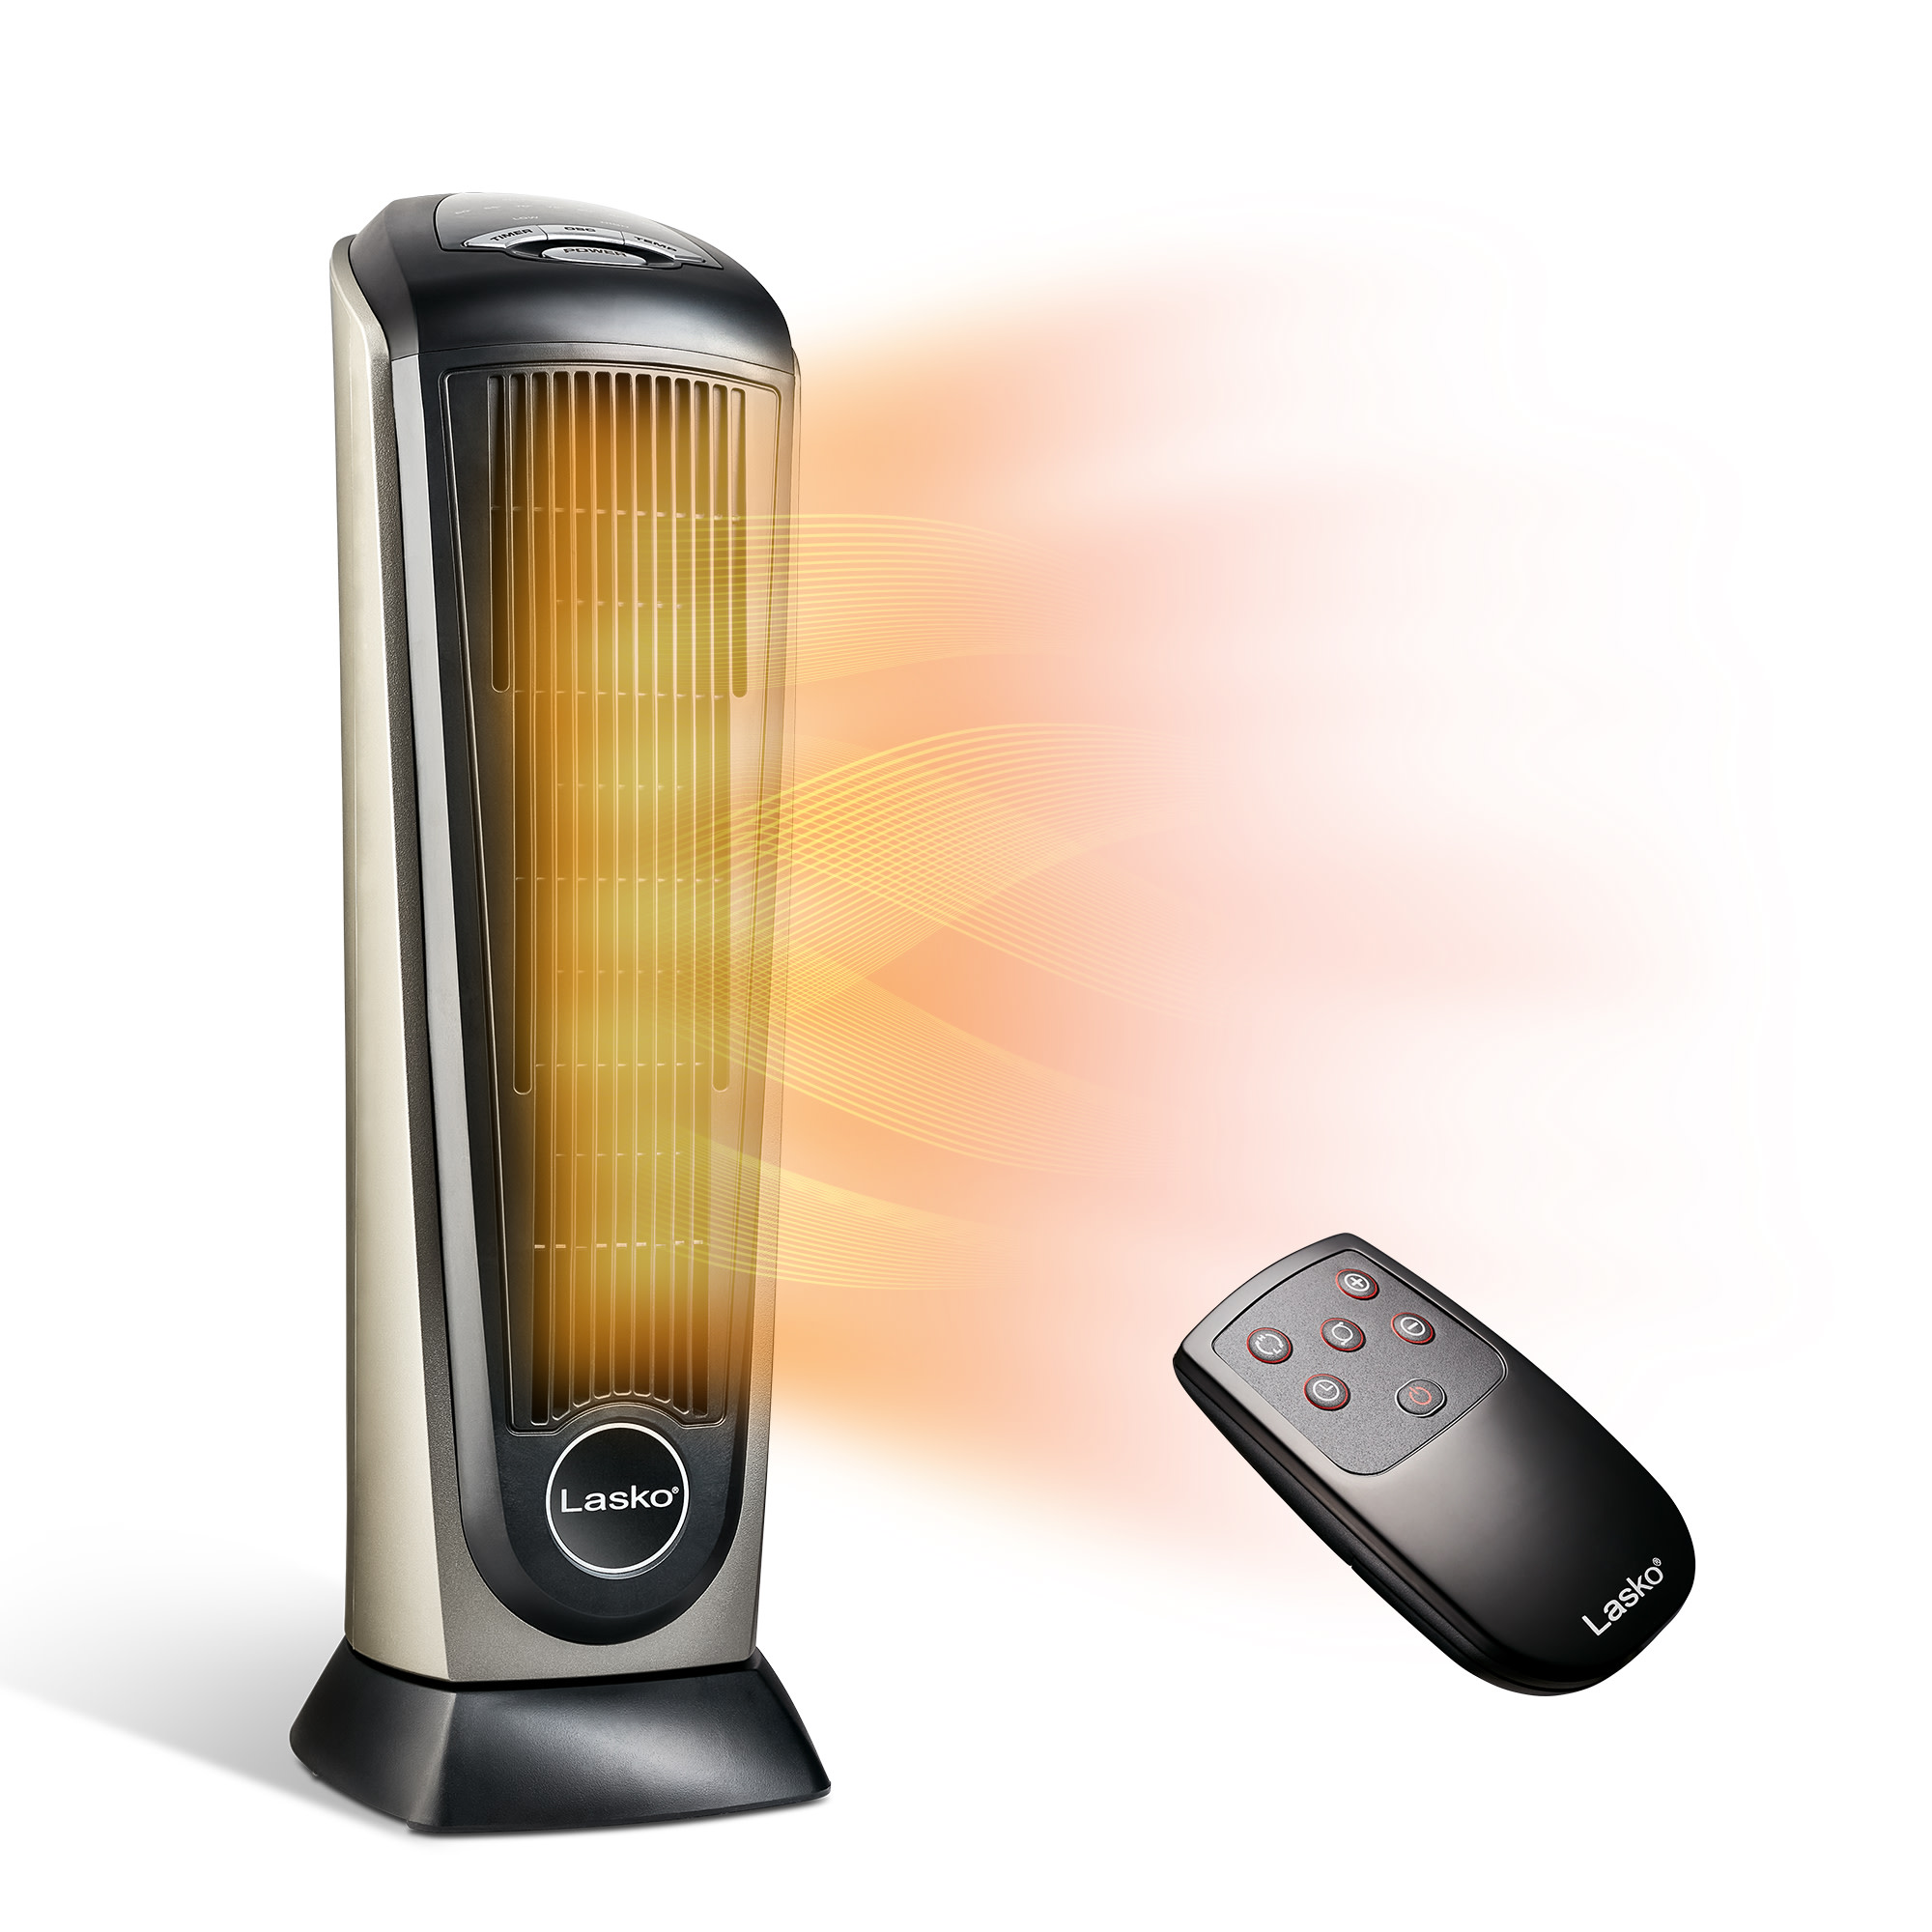 Lasko 22.5" 1500W Oscillating Ceramic Tower Space Heater with Remote, 751320, Black, New - image 1 of 13